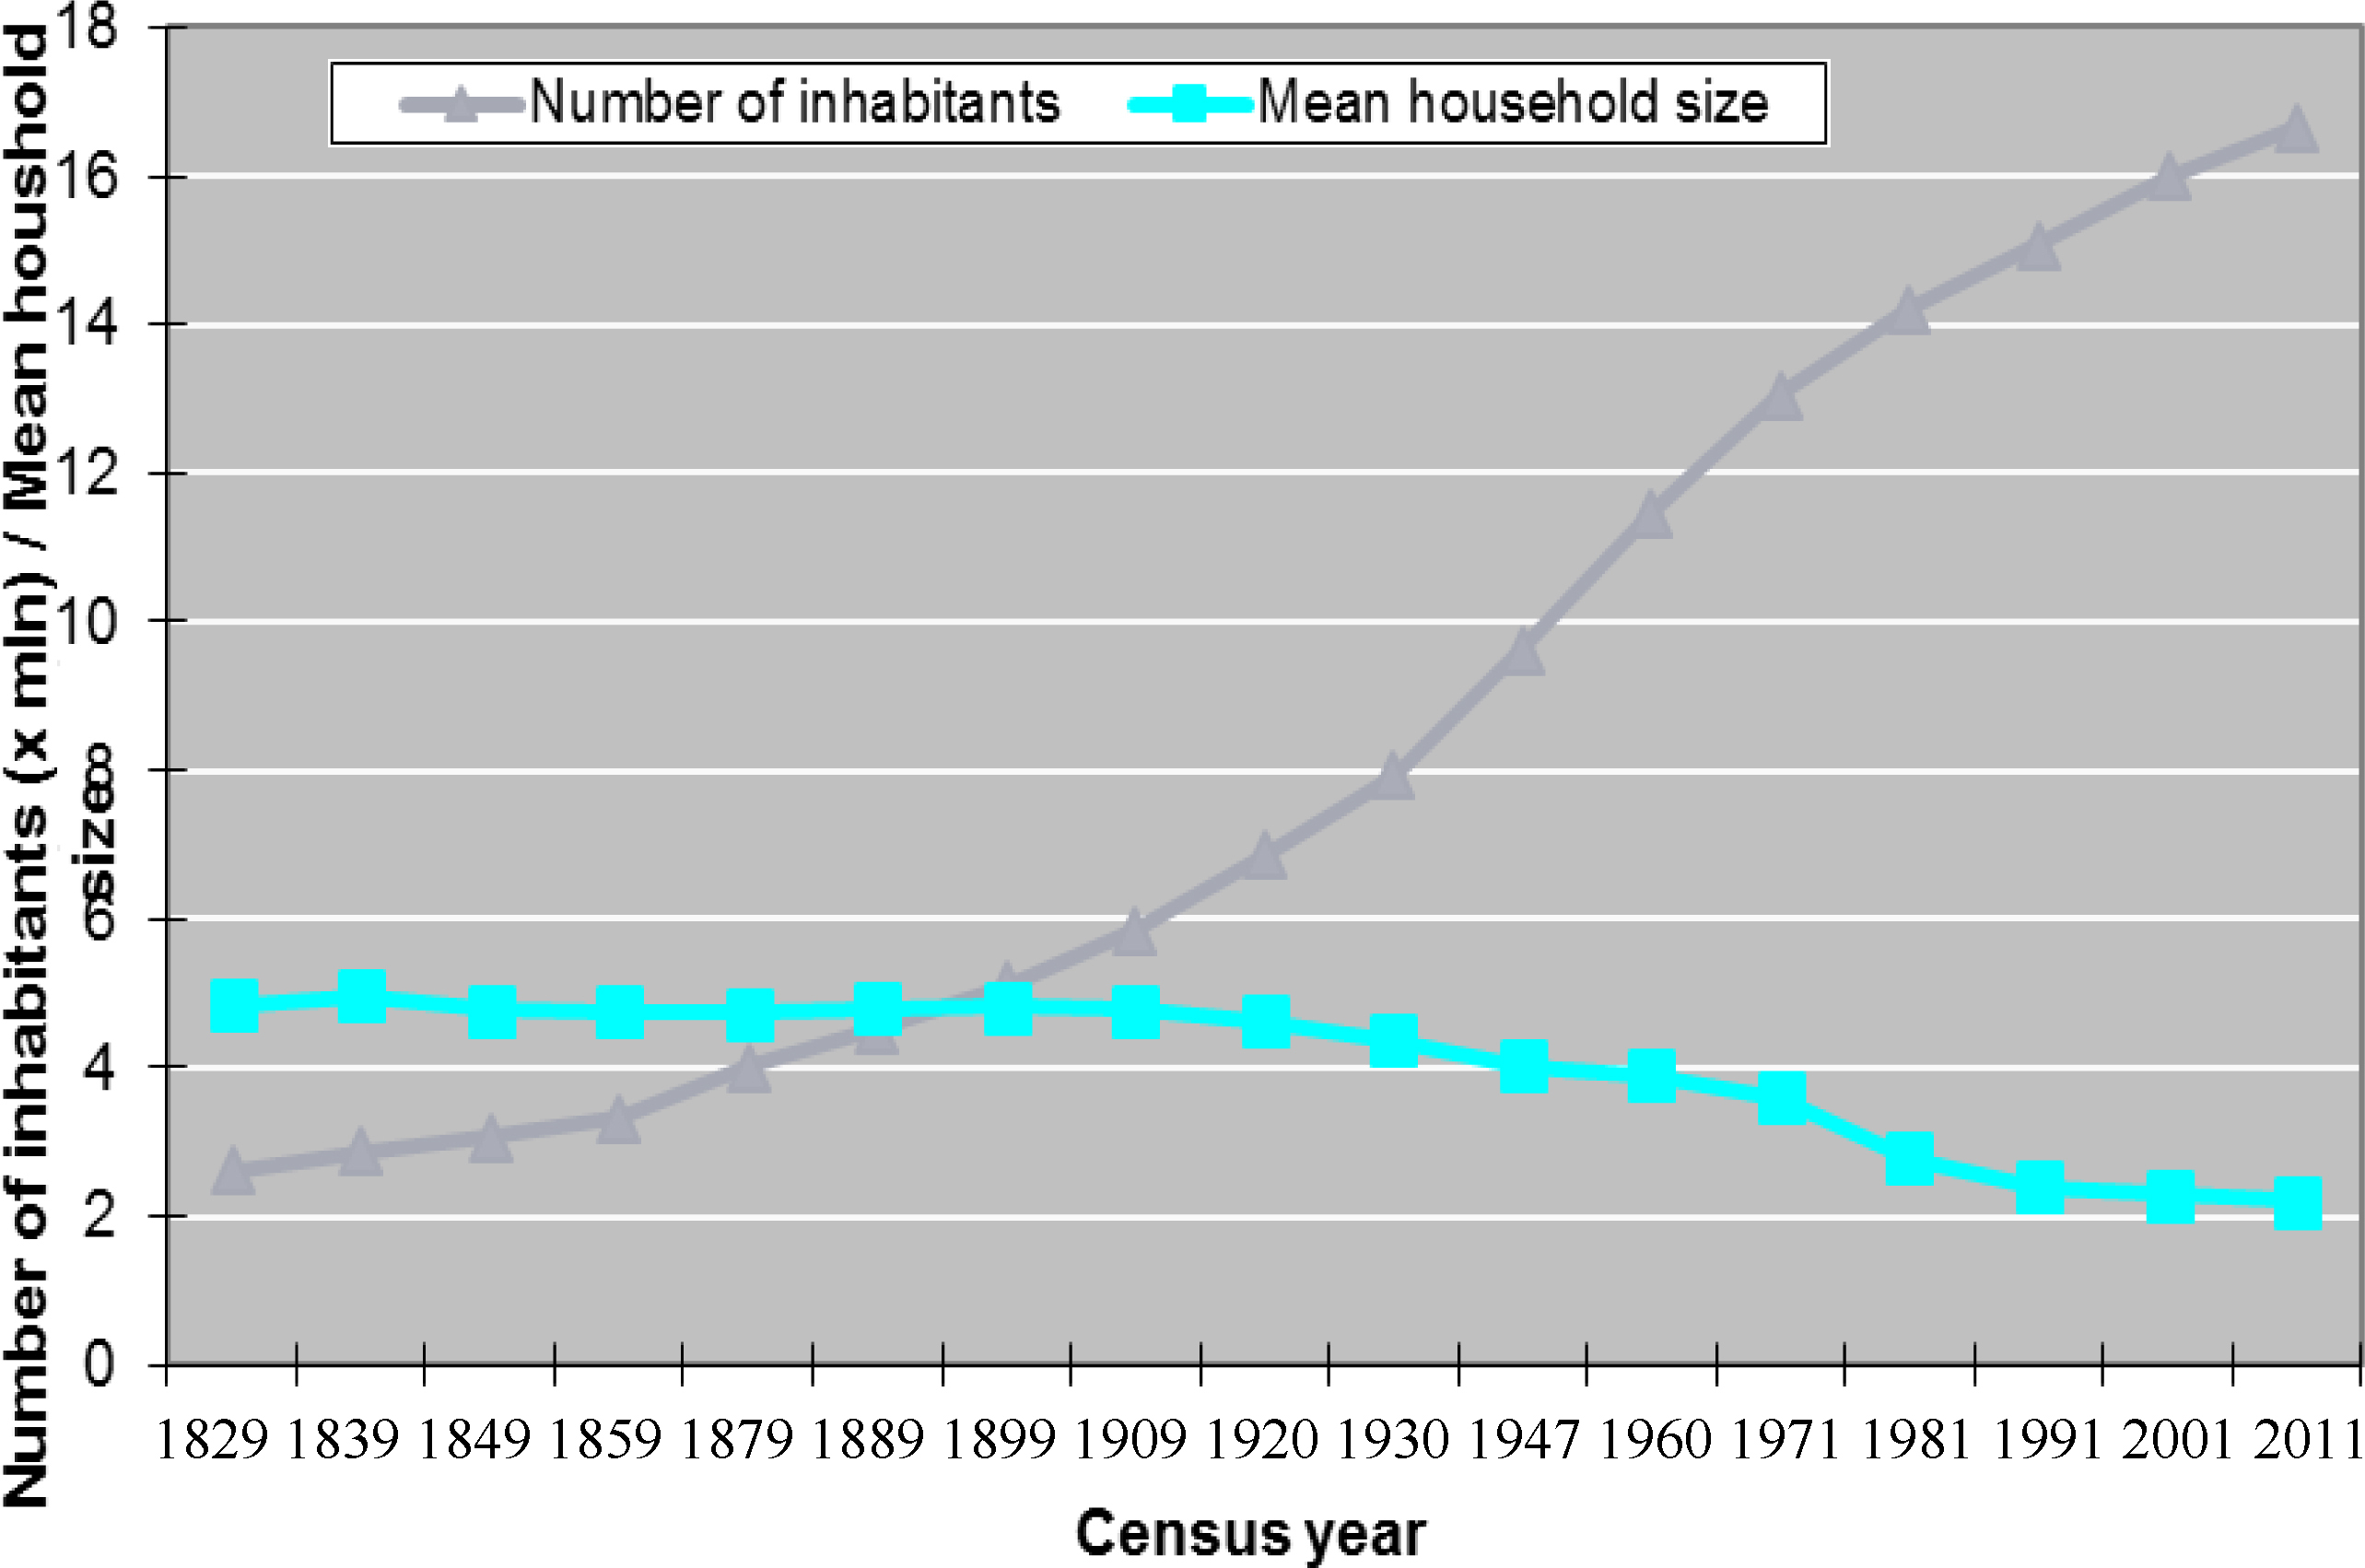 Number of inhabitants and mean household size in the Netherlands, 1829–2011. Source: Statistics Netherlands.